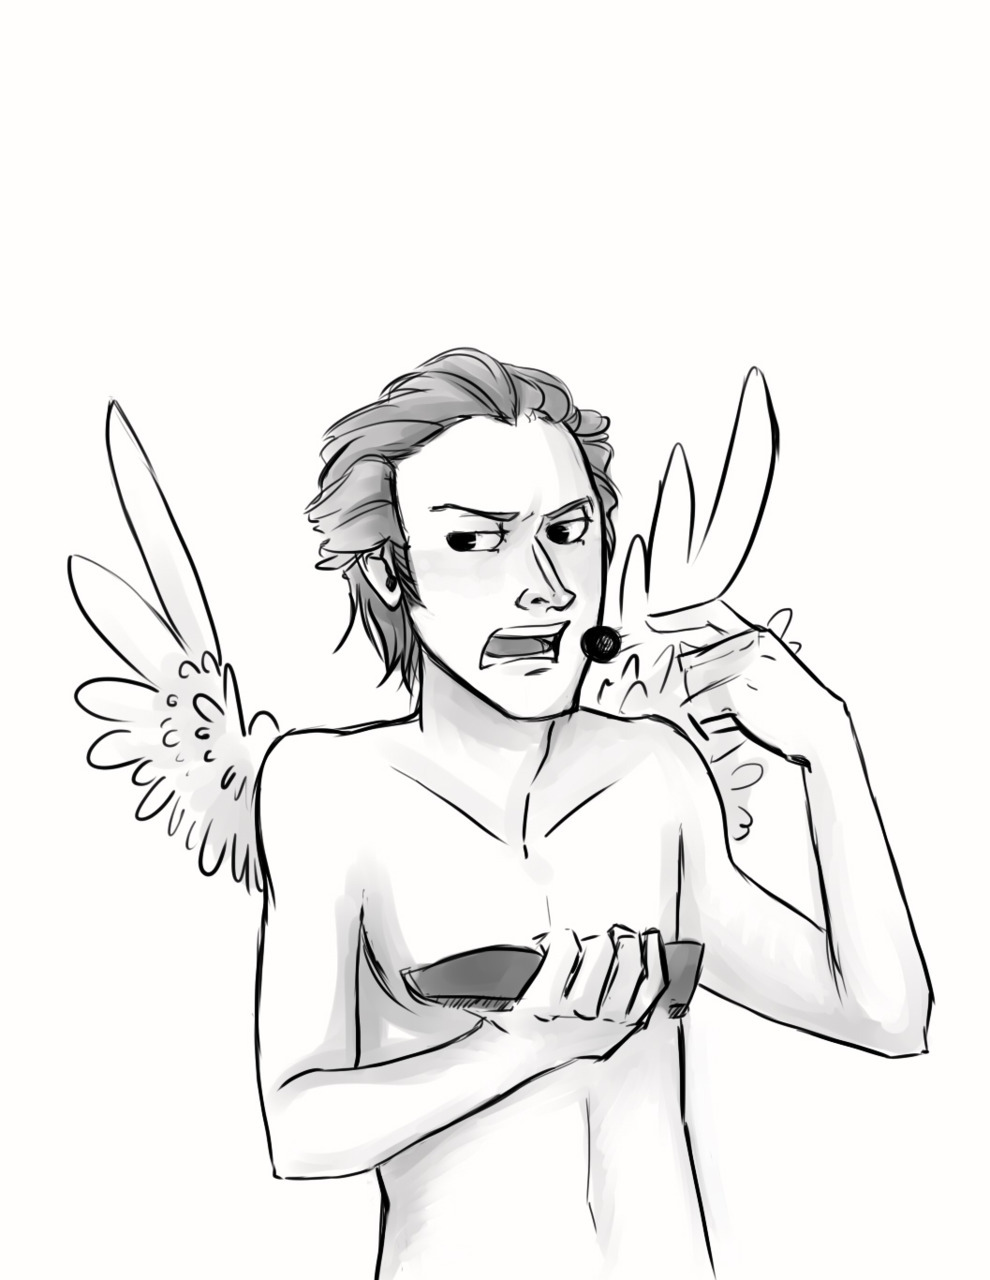 Gabriel&rsquo;s not dead, he&rsquo;s been demoted to cupid. Done as a commission